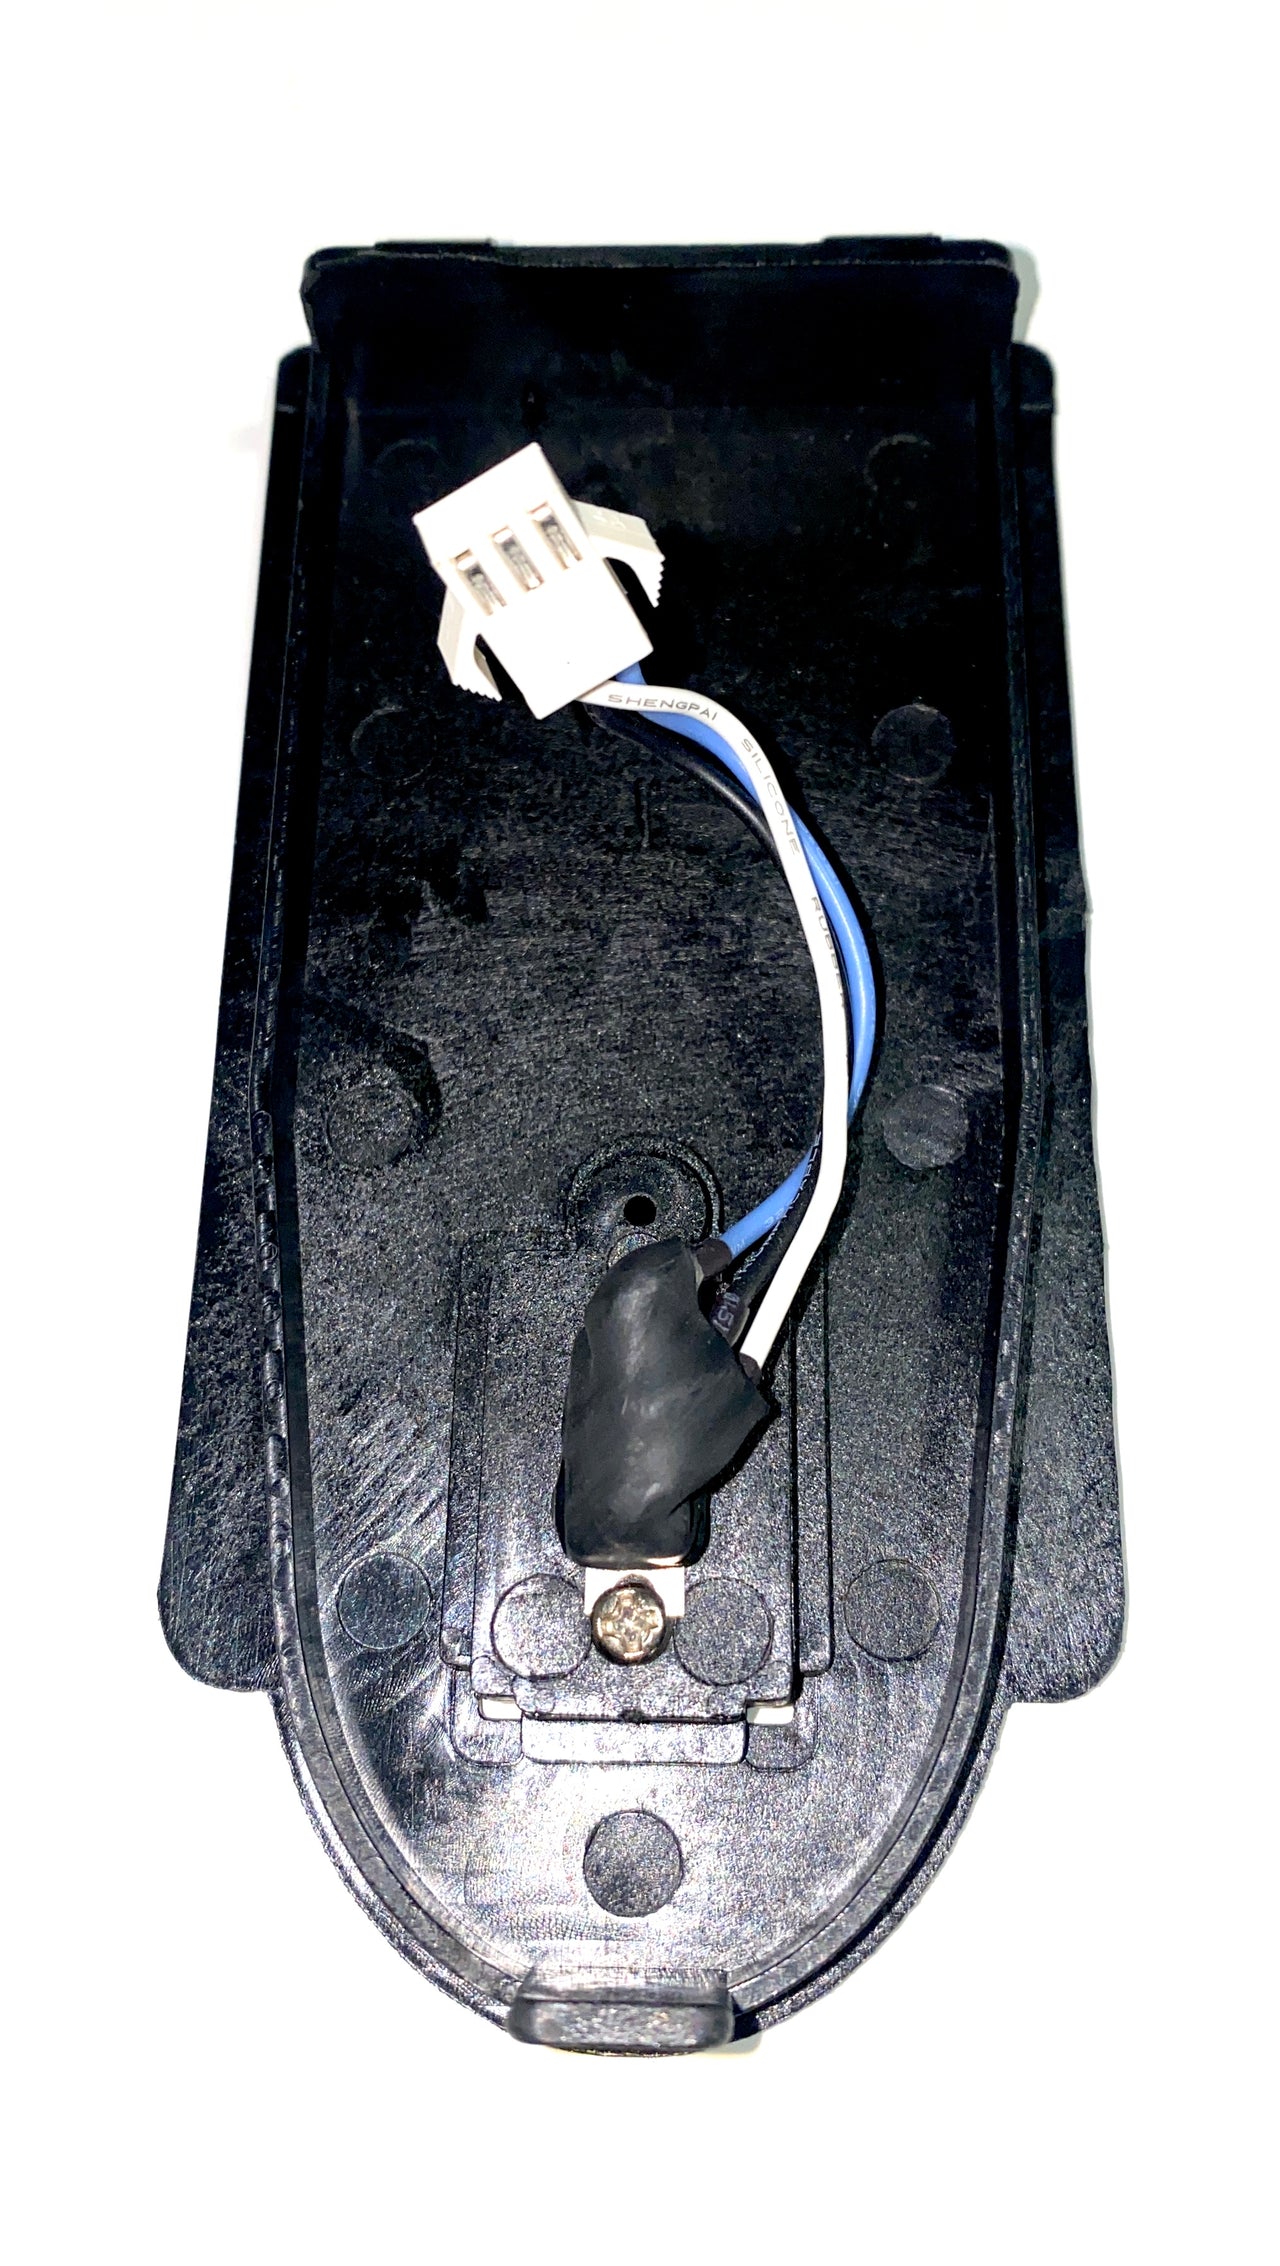 Bottom Cover With Built-In 3 Speed Switch | P99-106